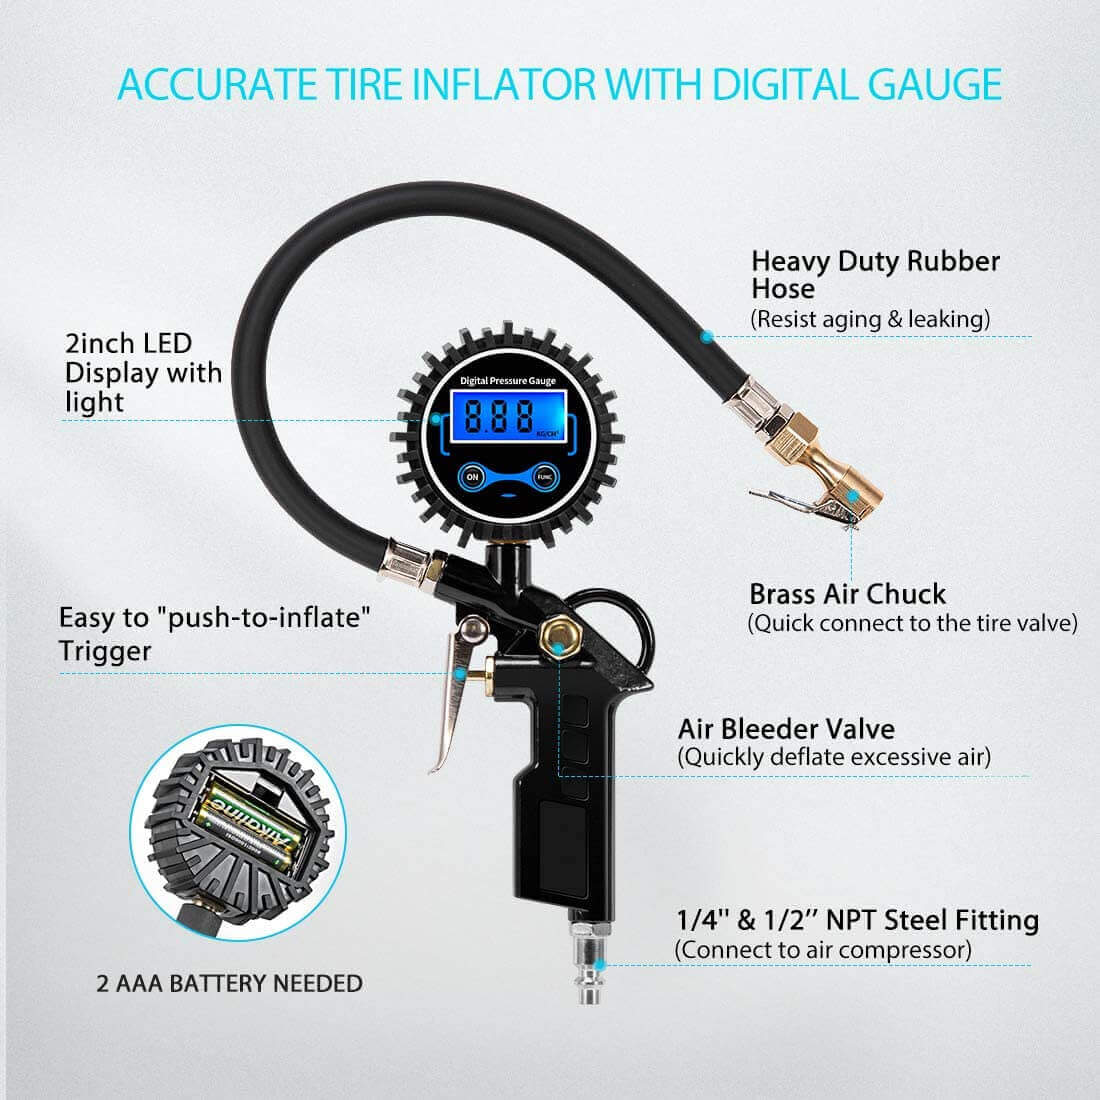 SPECSTAR 2 Pack Digital Tire Inflator with Pressure Gauge, Night Available 250 PSI Air Chuck and Compressor Accessories with Rubber Hose and Quick Connect Attachment for 0.1 Display Resolution